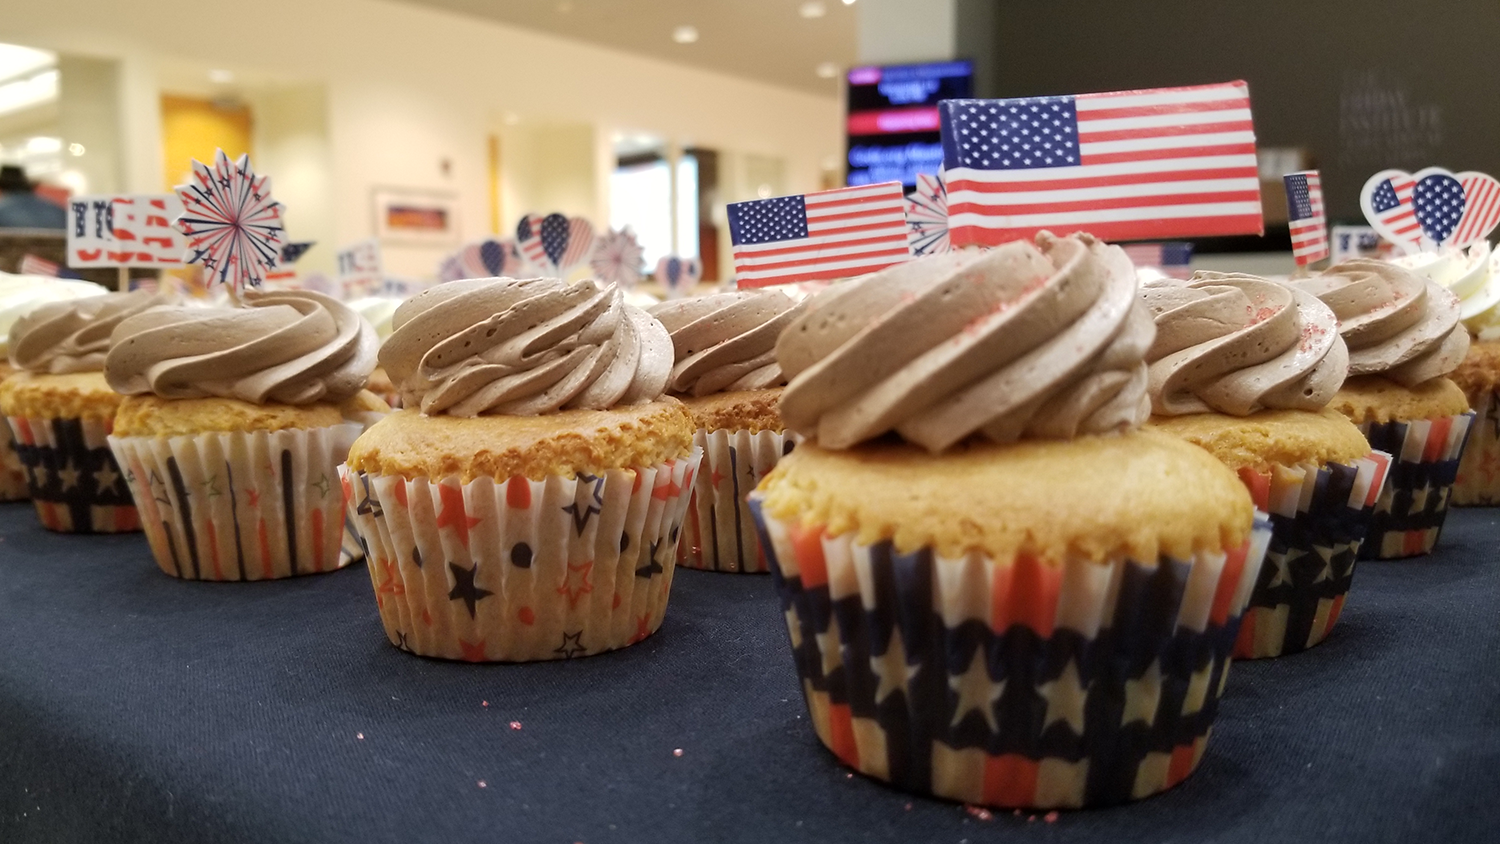 Cupcakes served at the Dessert with Democracy event at the NC State College of Education